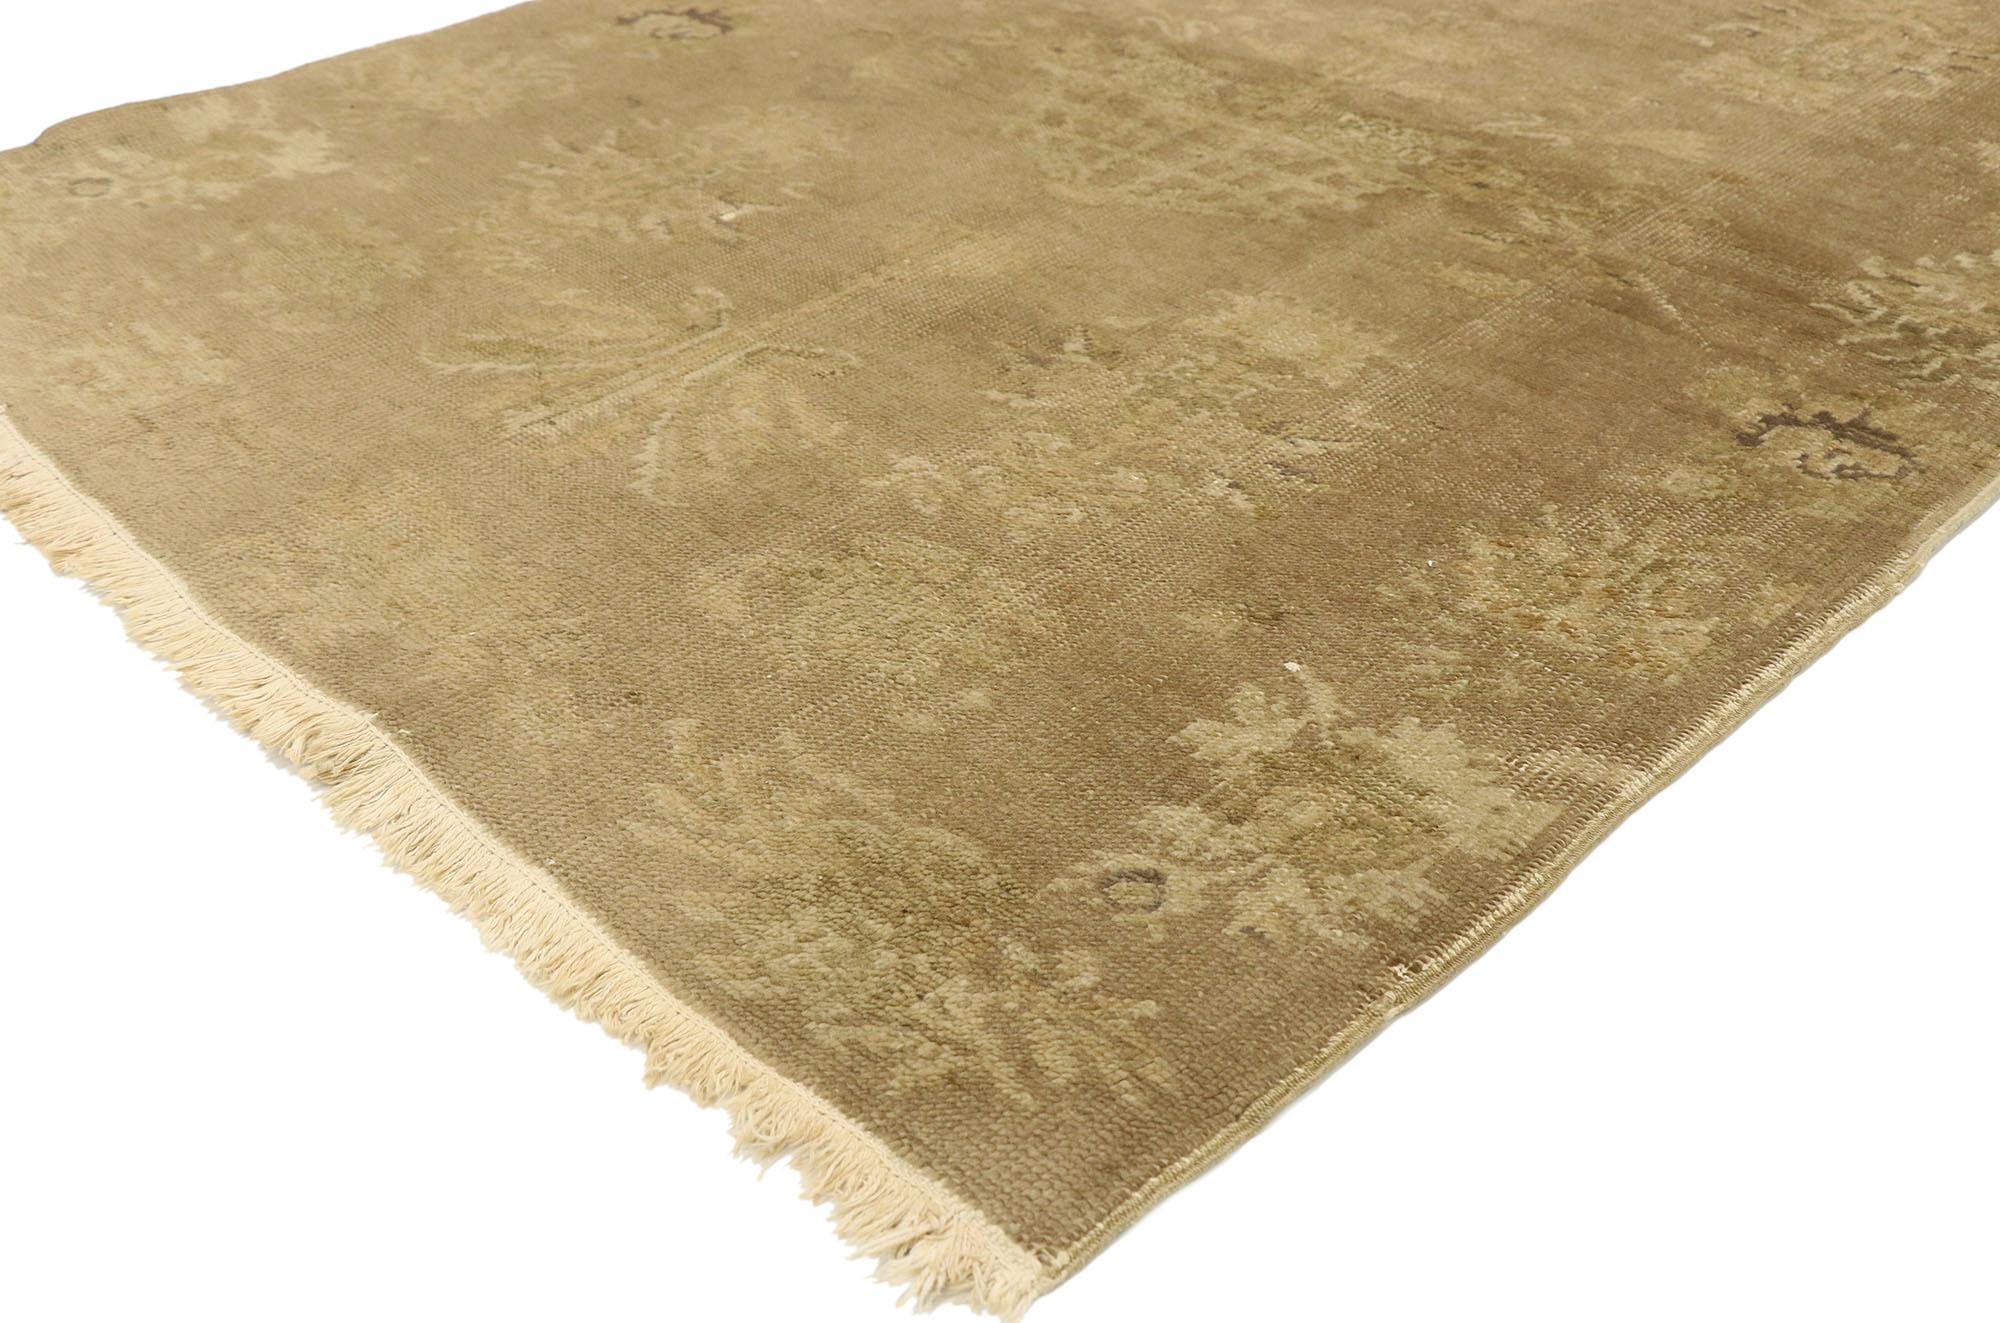 72506, distressed vintage Turkish rug with shabby chic country farmhouse style. The intricate designs and subdued colors of this hand knotted Turkish rug create a vibe of relaxed elegance. Imagine this carpet in a room appointed with natural wood